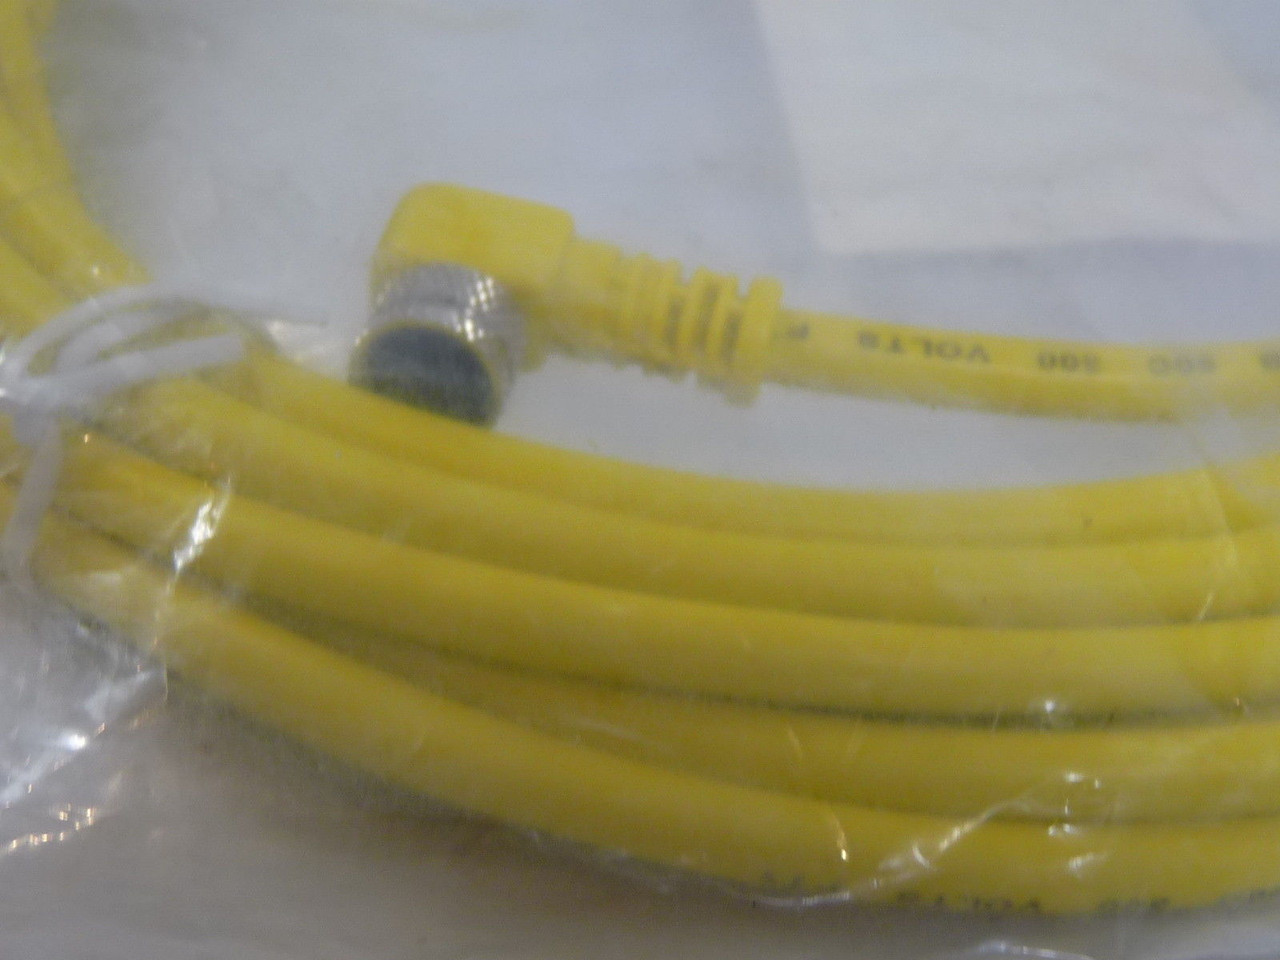 HTM Electric CFA3TZV075 Cable Connector ! NEW !